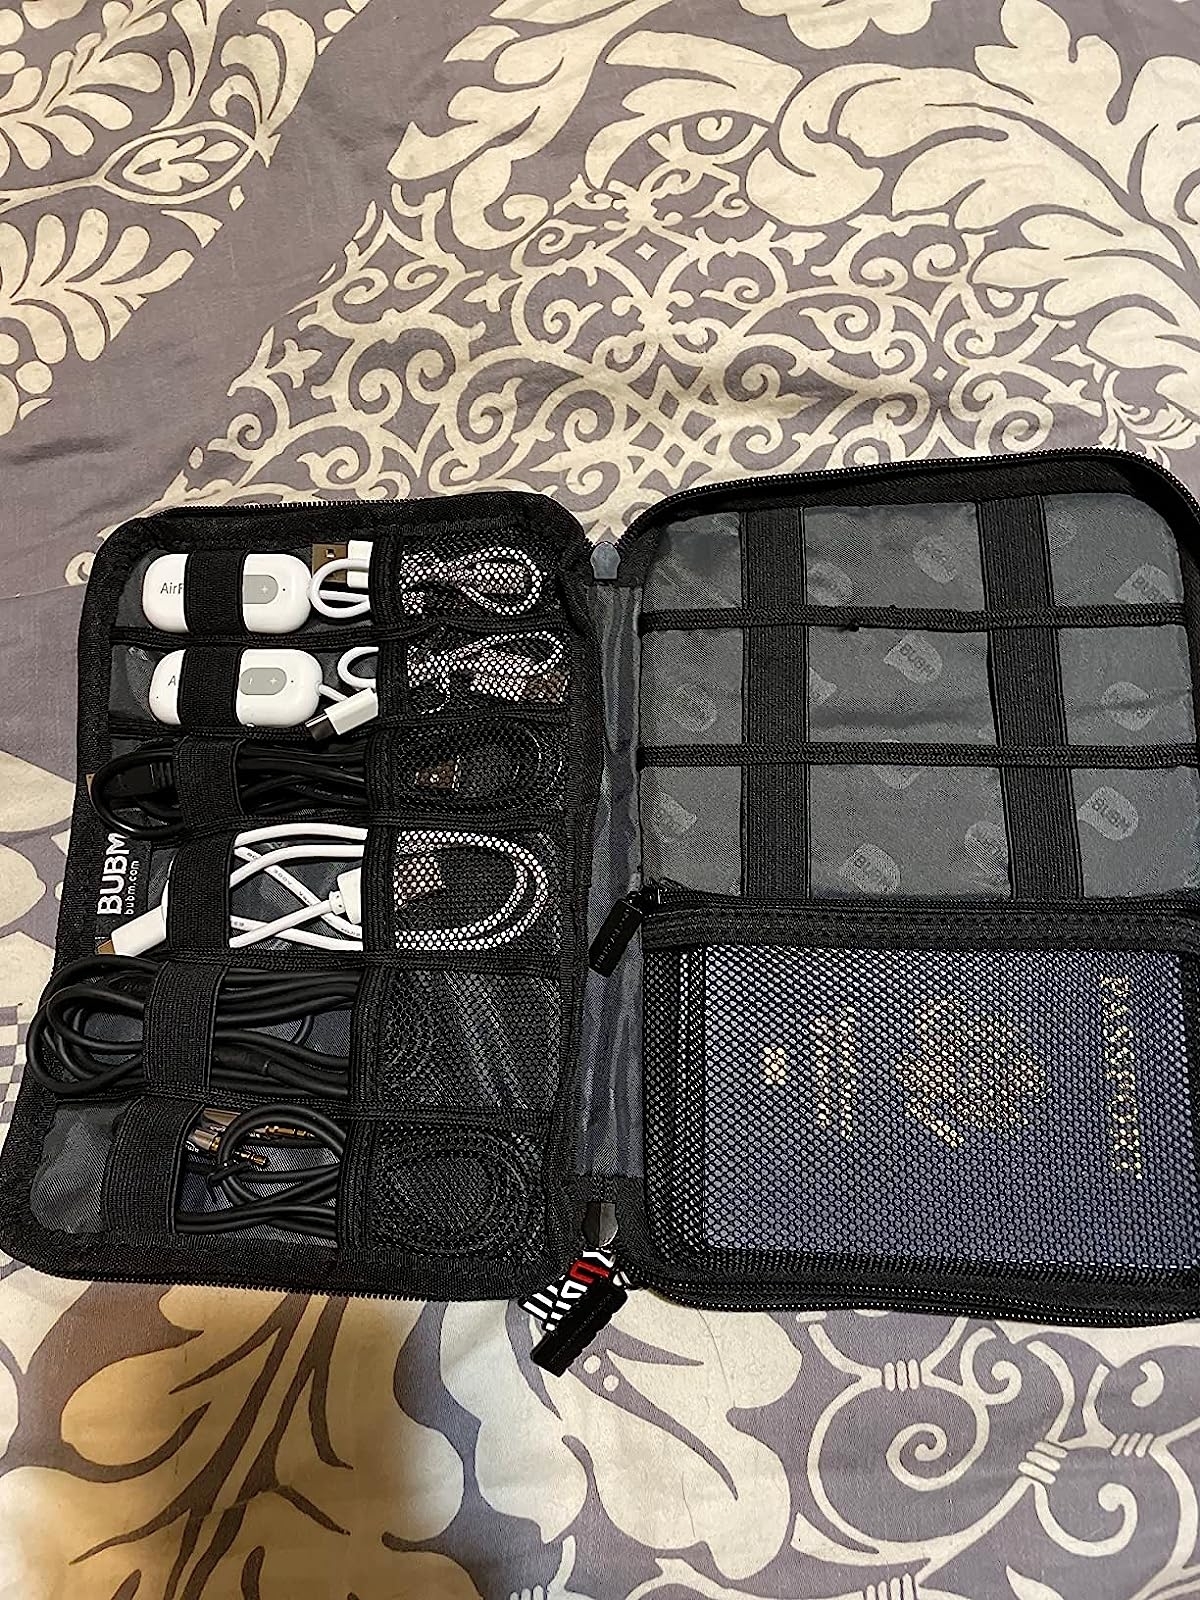 Reviewer&#x27;s gadget bag with cords and passport tucked in sleeves